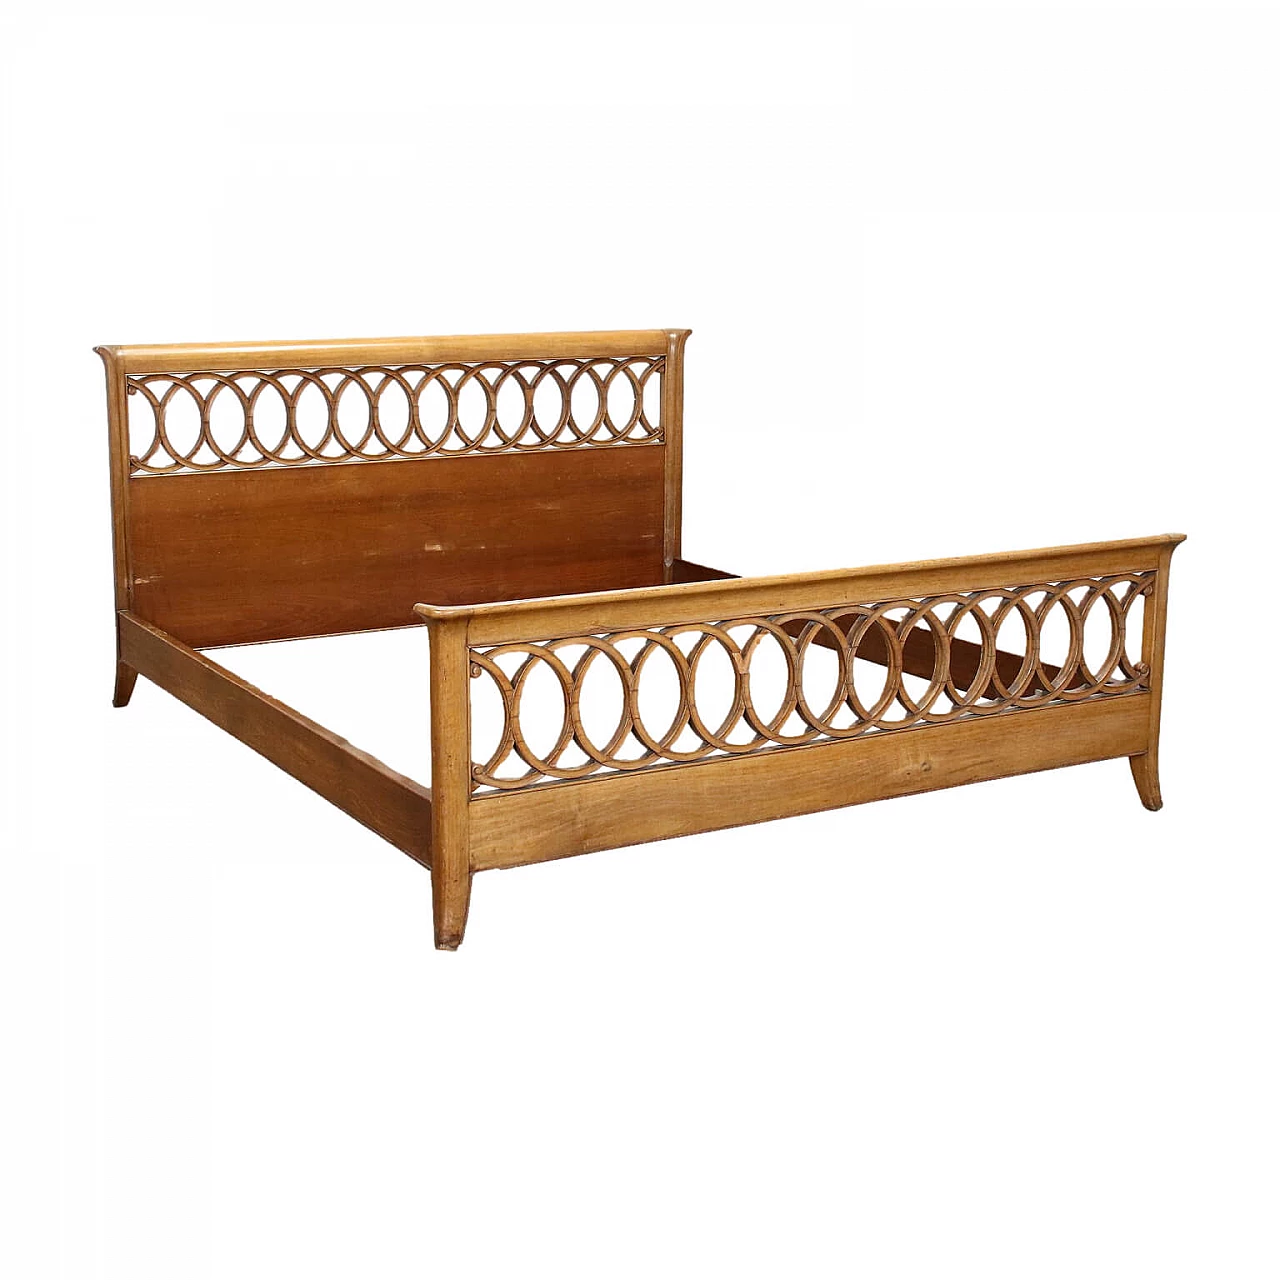 Wooden double bed, 1950s 1445027